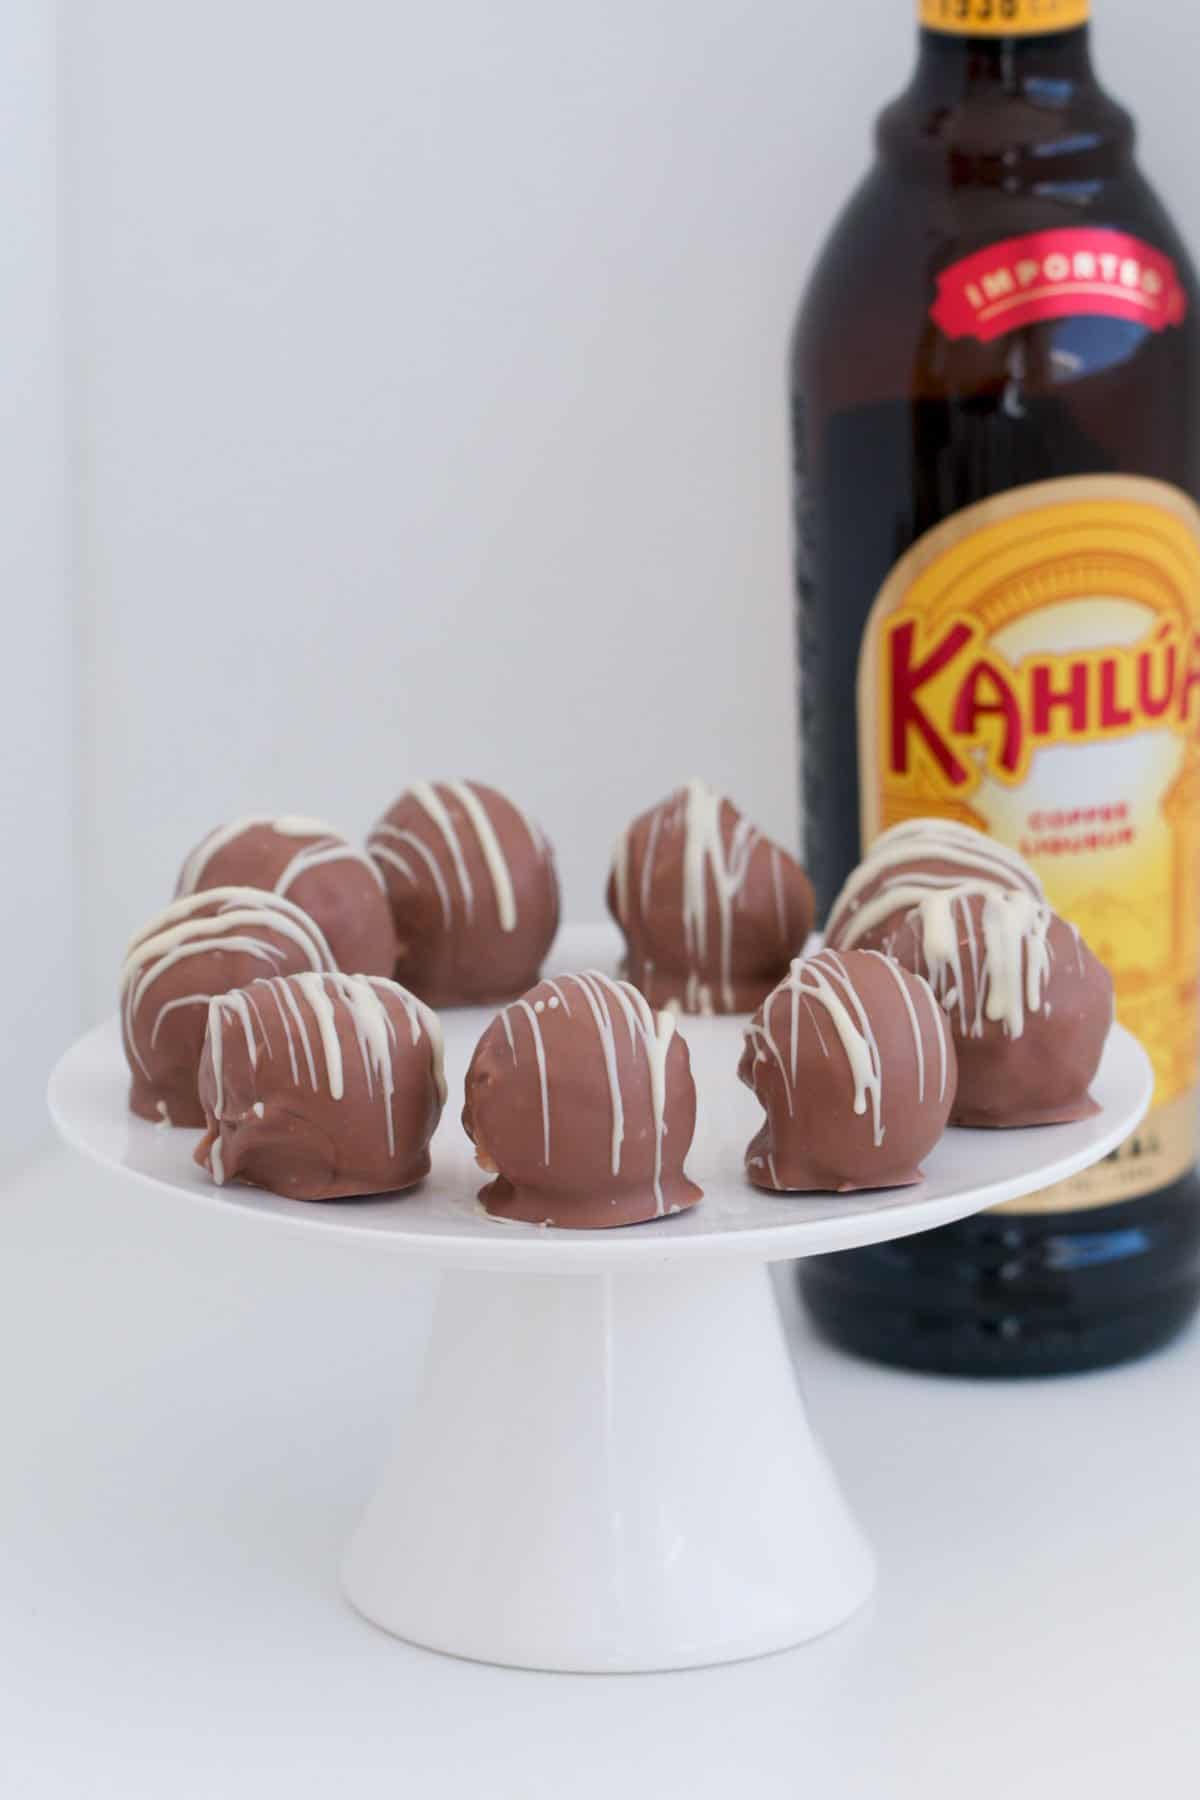 Kahlua cheesecake balls on a white cake plate in foreground with bottle of kahlua bottle in background